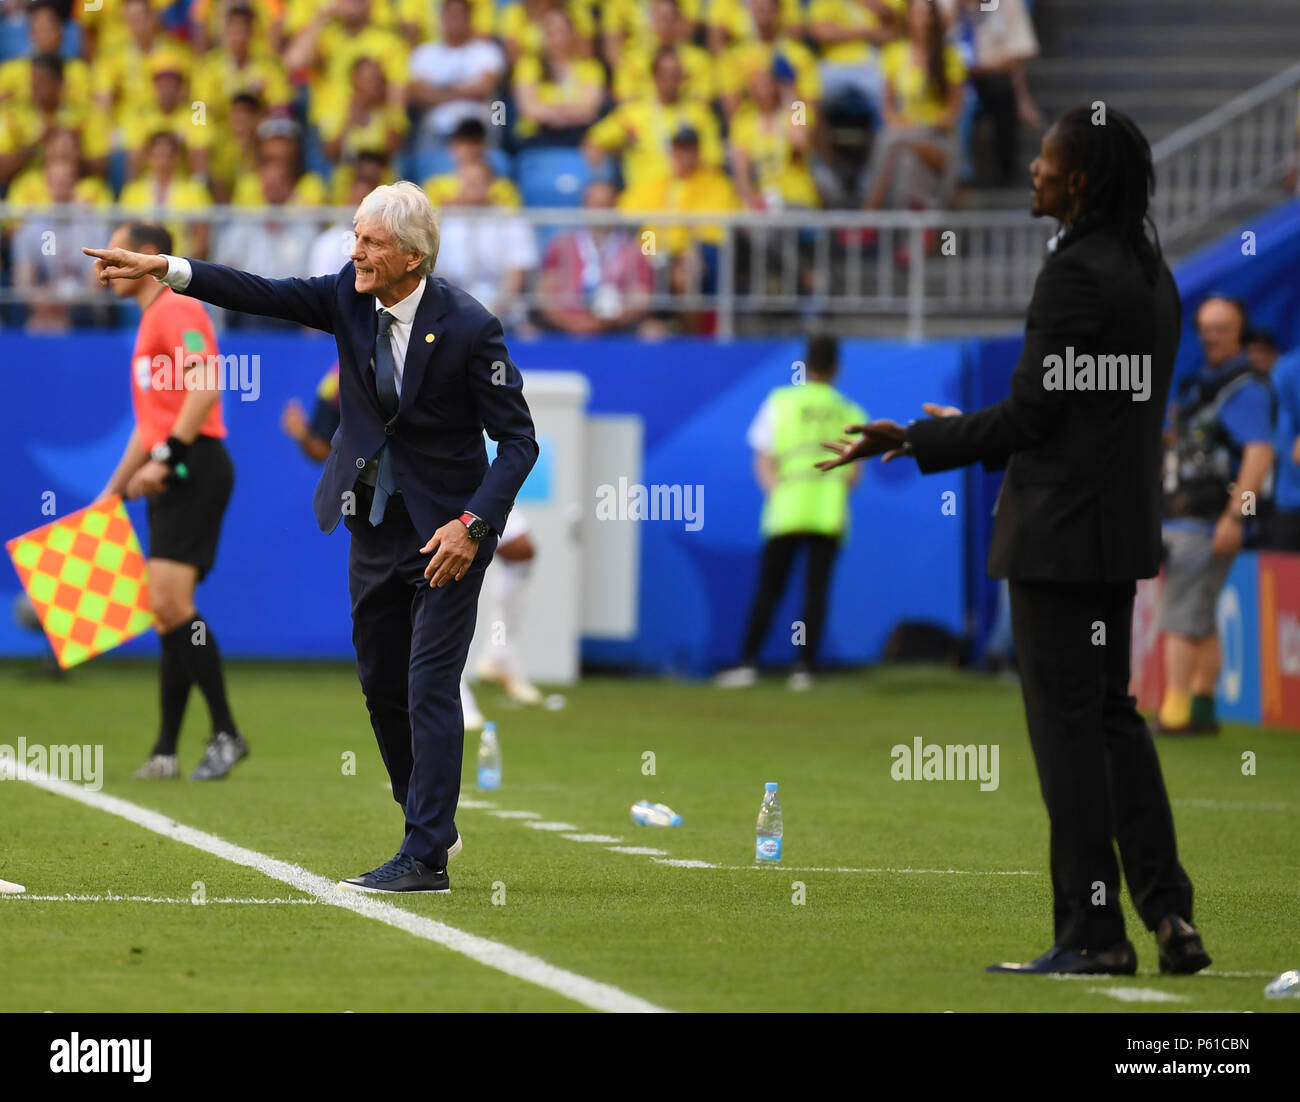 Samara, Russia. 28th June, 2018. Head coach Jose Pekerman (L) of Colombia gives instructions to players during the 2018 FIFA World Cup Group H match between Colombia and Senegal in Samara, Russia, June 28, 2018. Credit: Chen Cheng/Xinhua/Alamy Live News Stock Photo